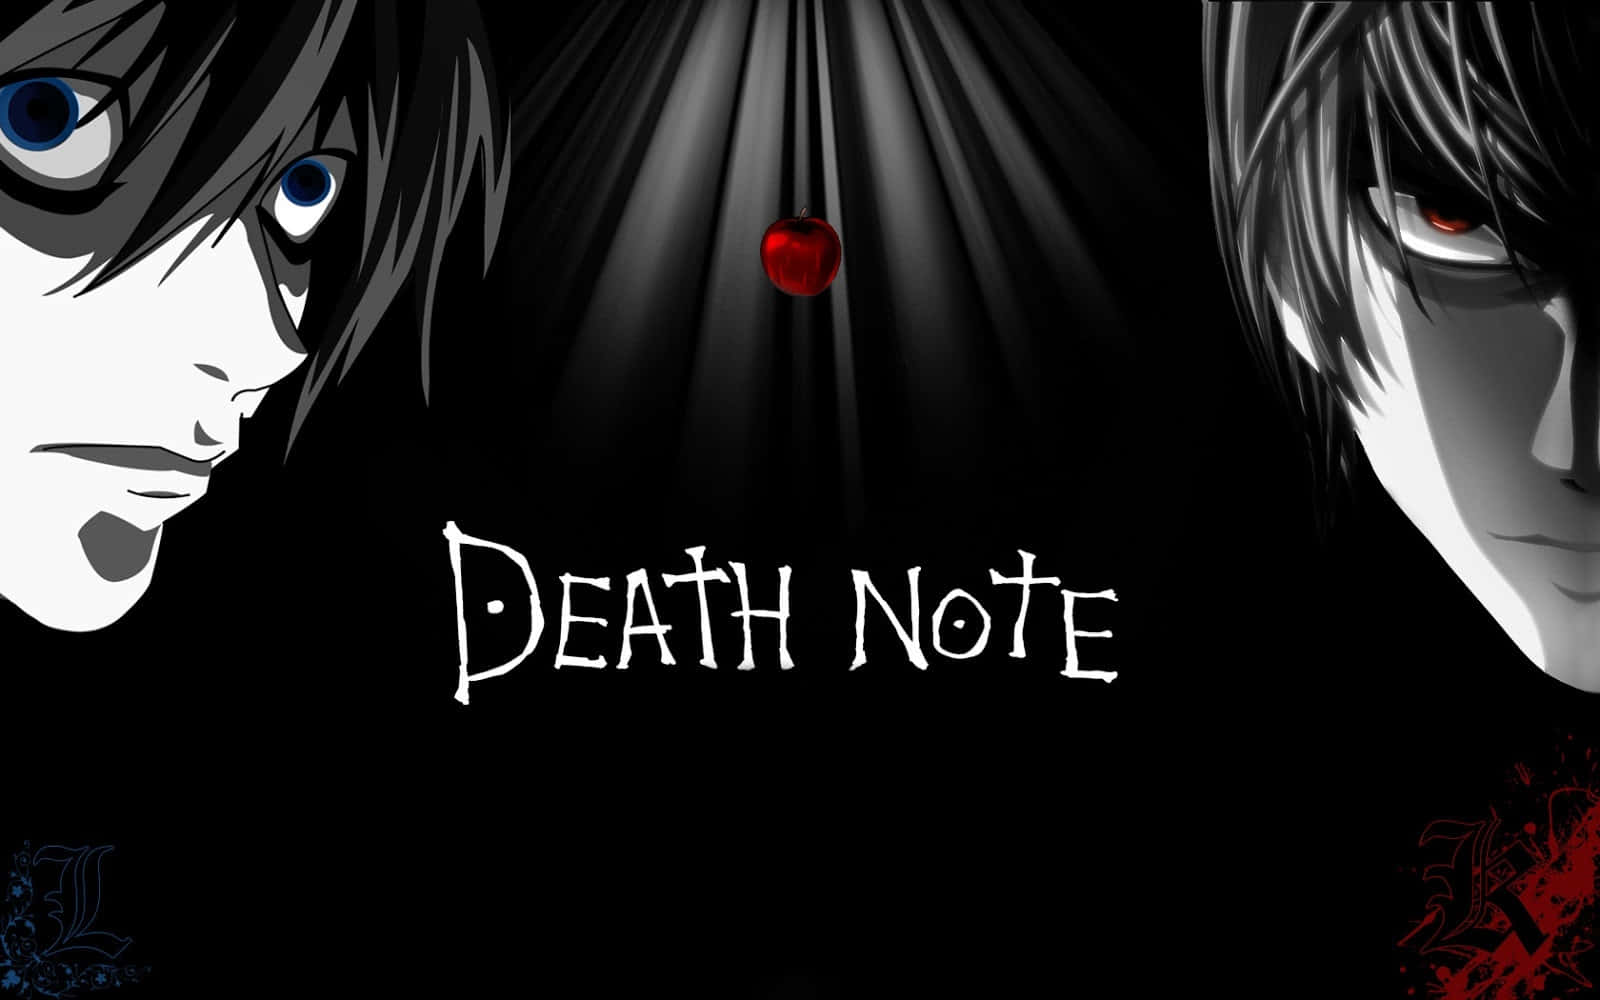 Experience the chilling mystery of the Death Note